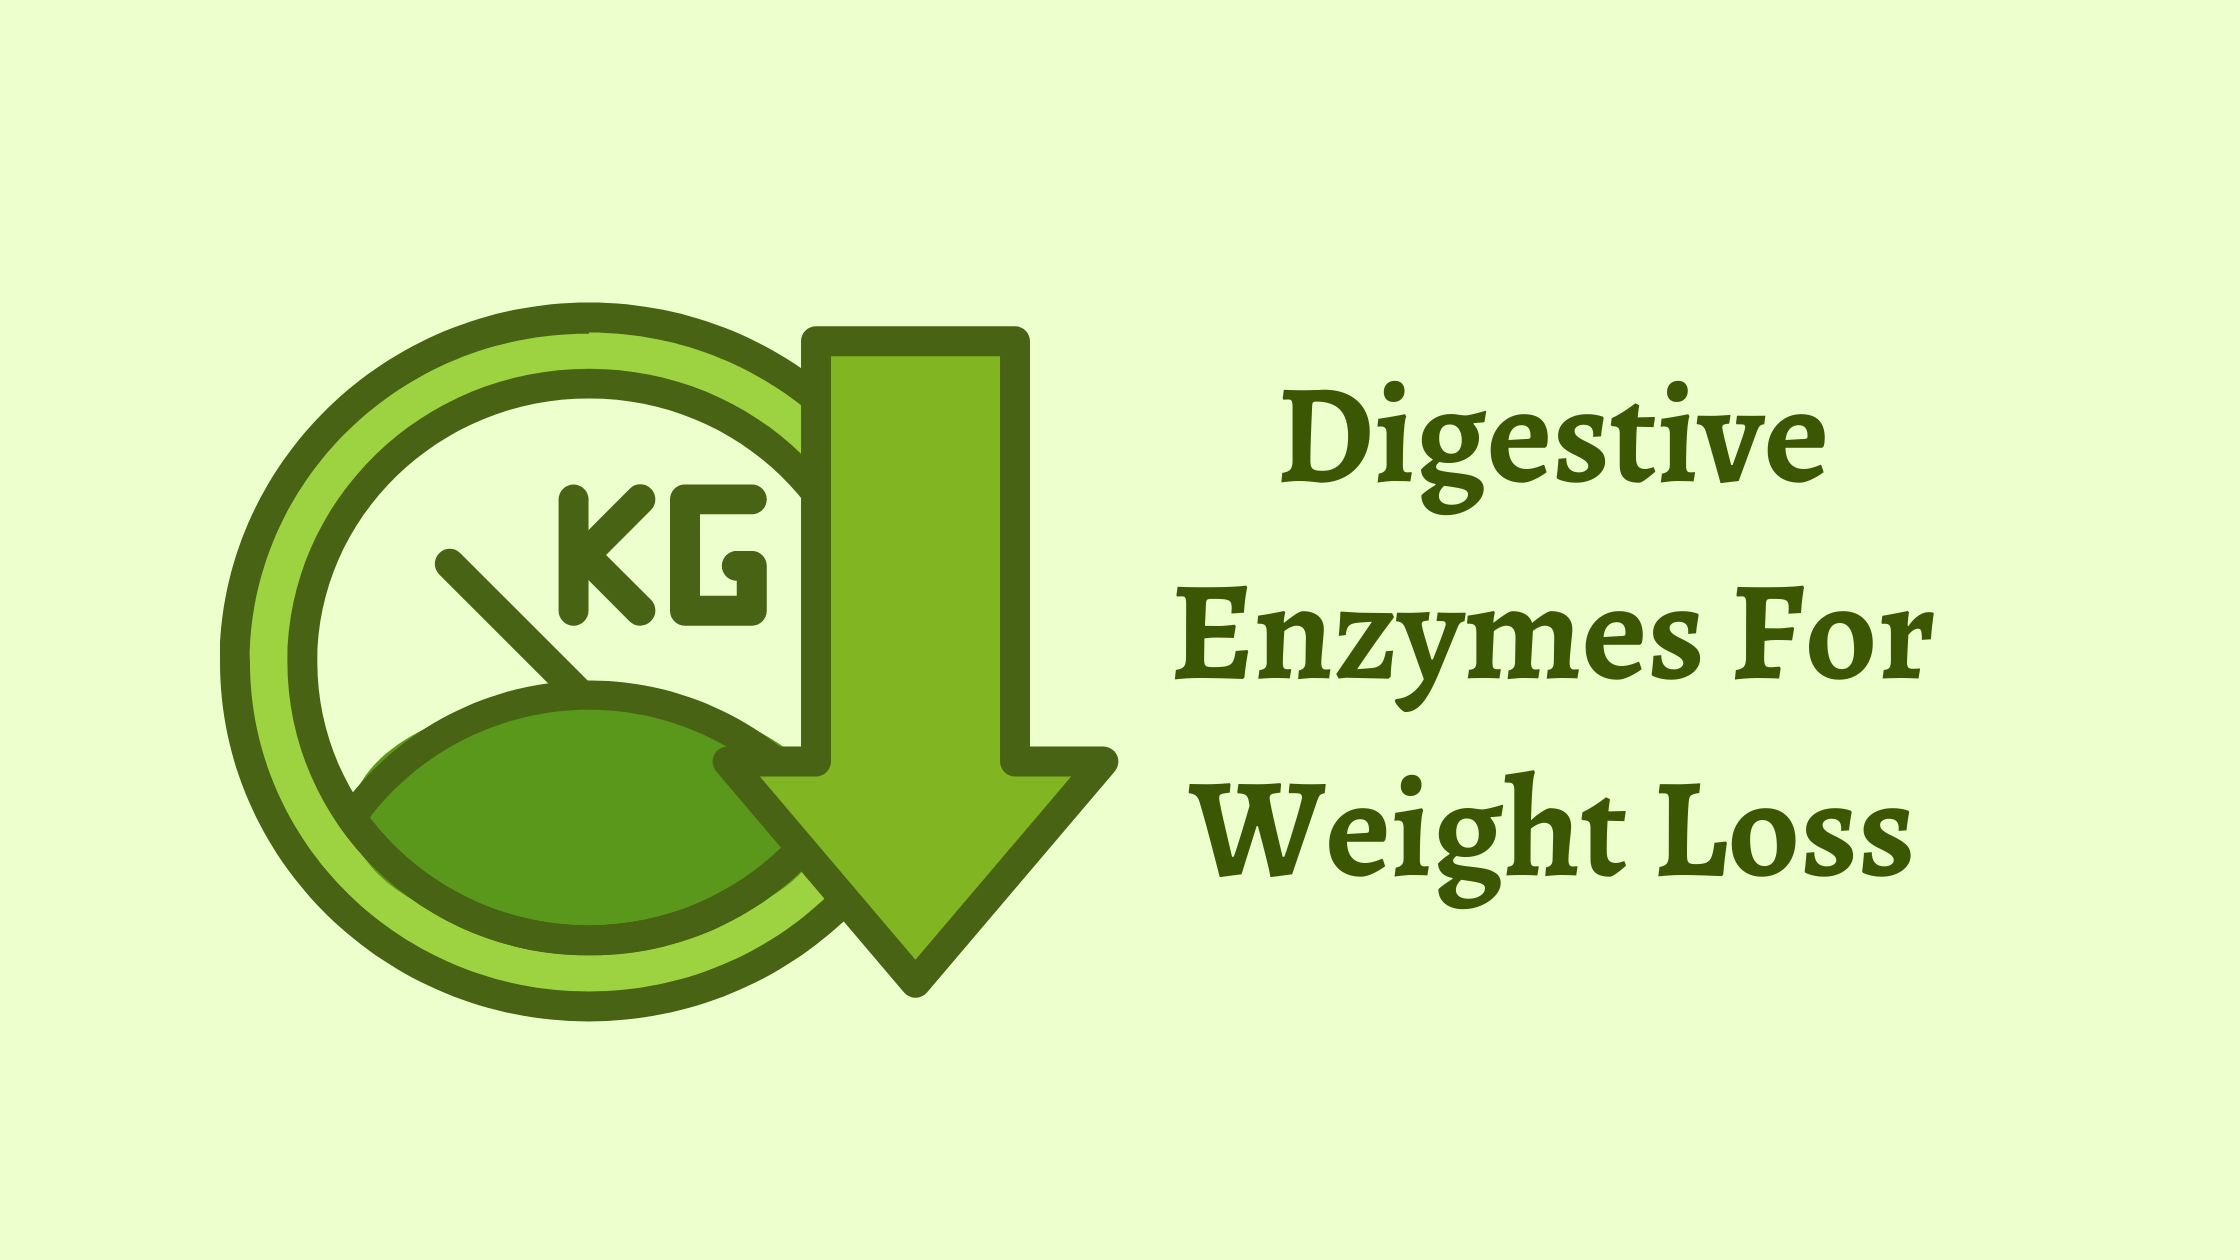 Digestive Enzymes For Weight Loss